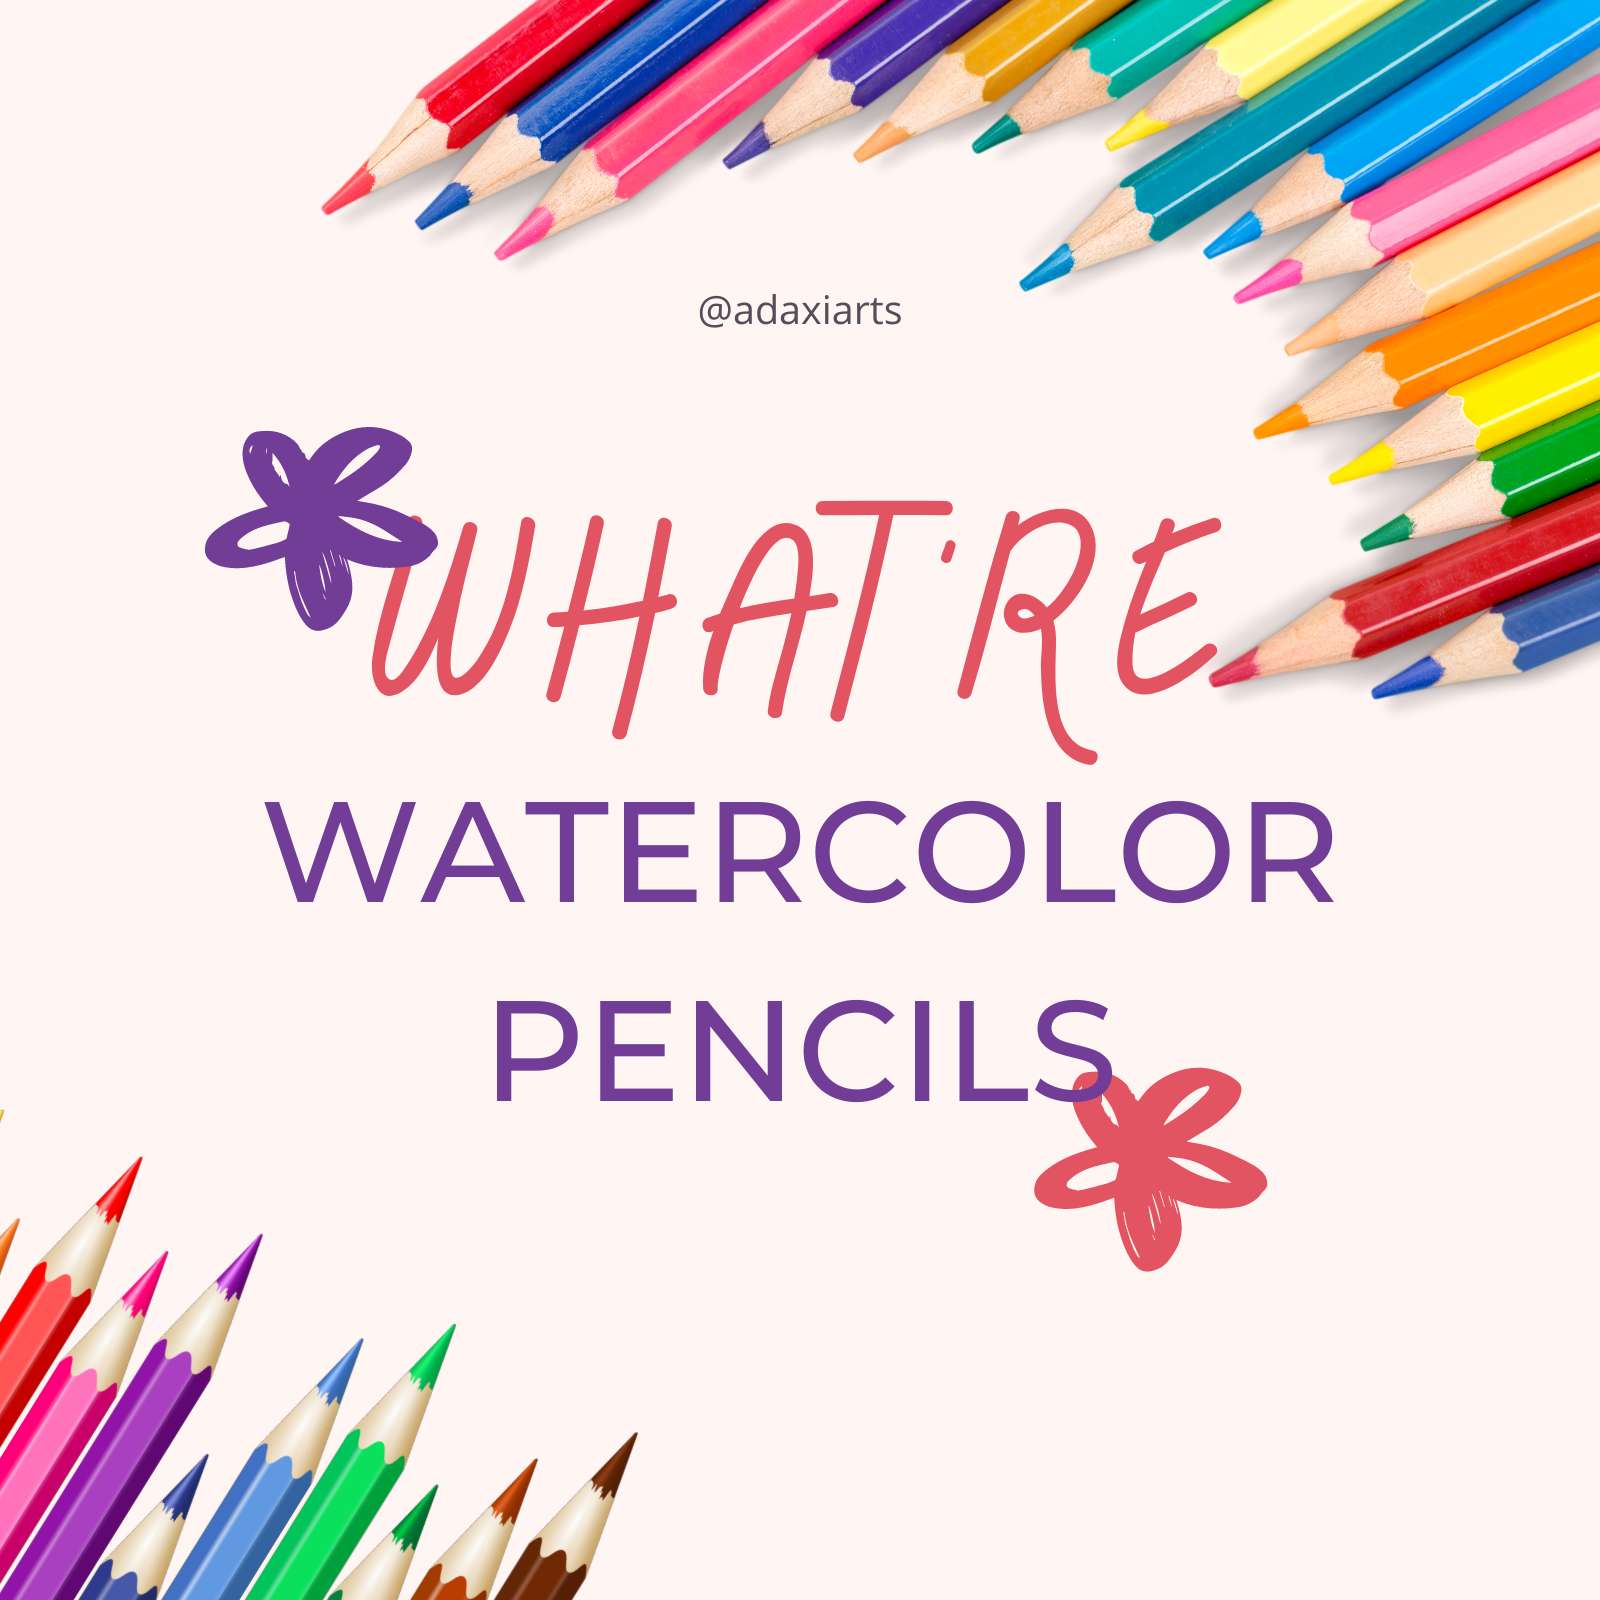 what are watercolor pencils